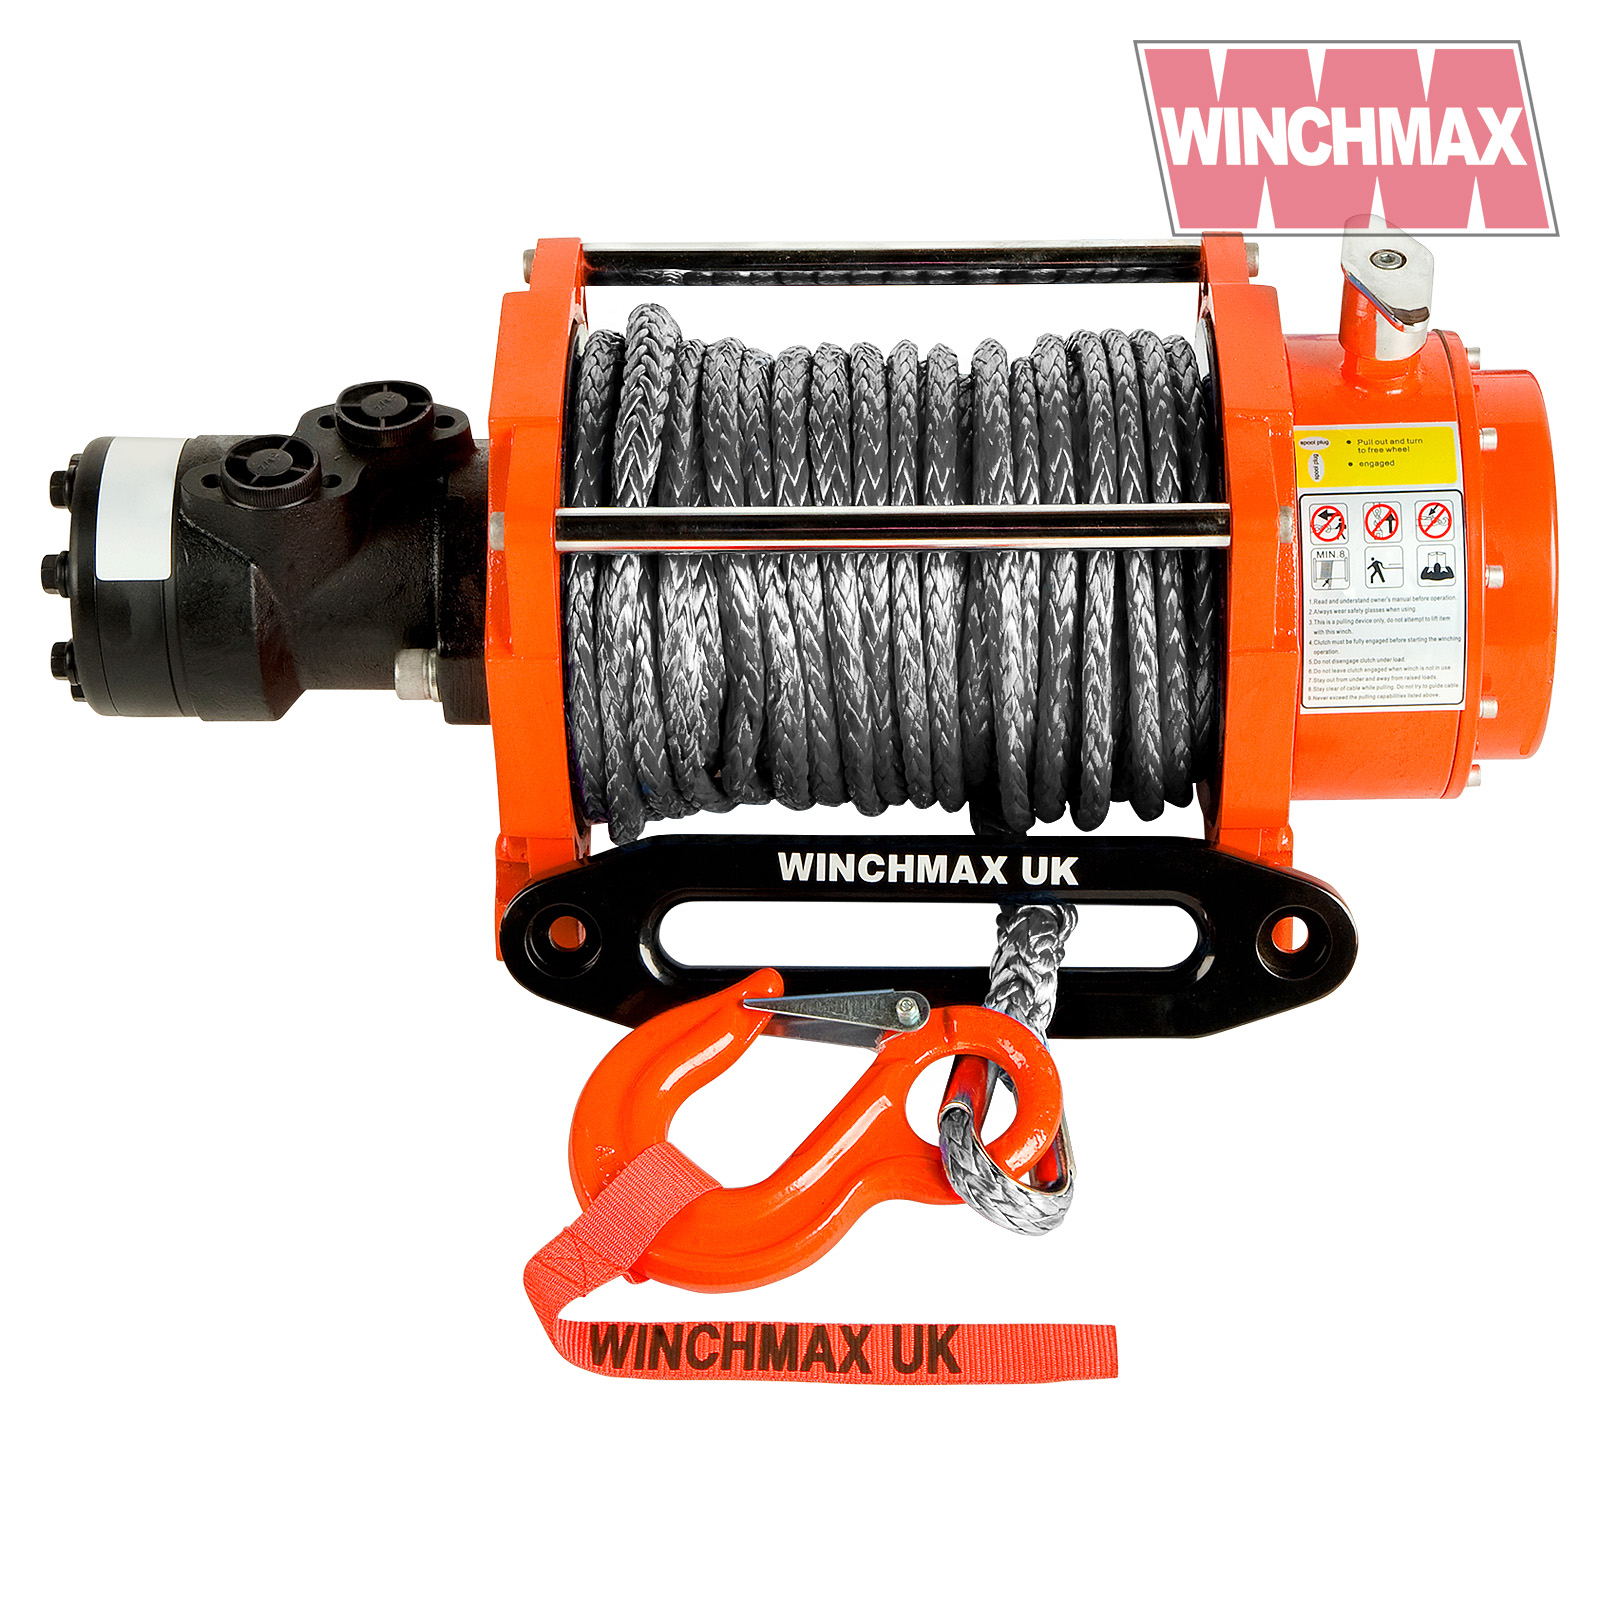 Winchmax 15000lb Hydraulic Winch with Synthetic Rope